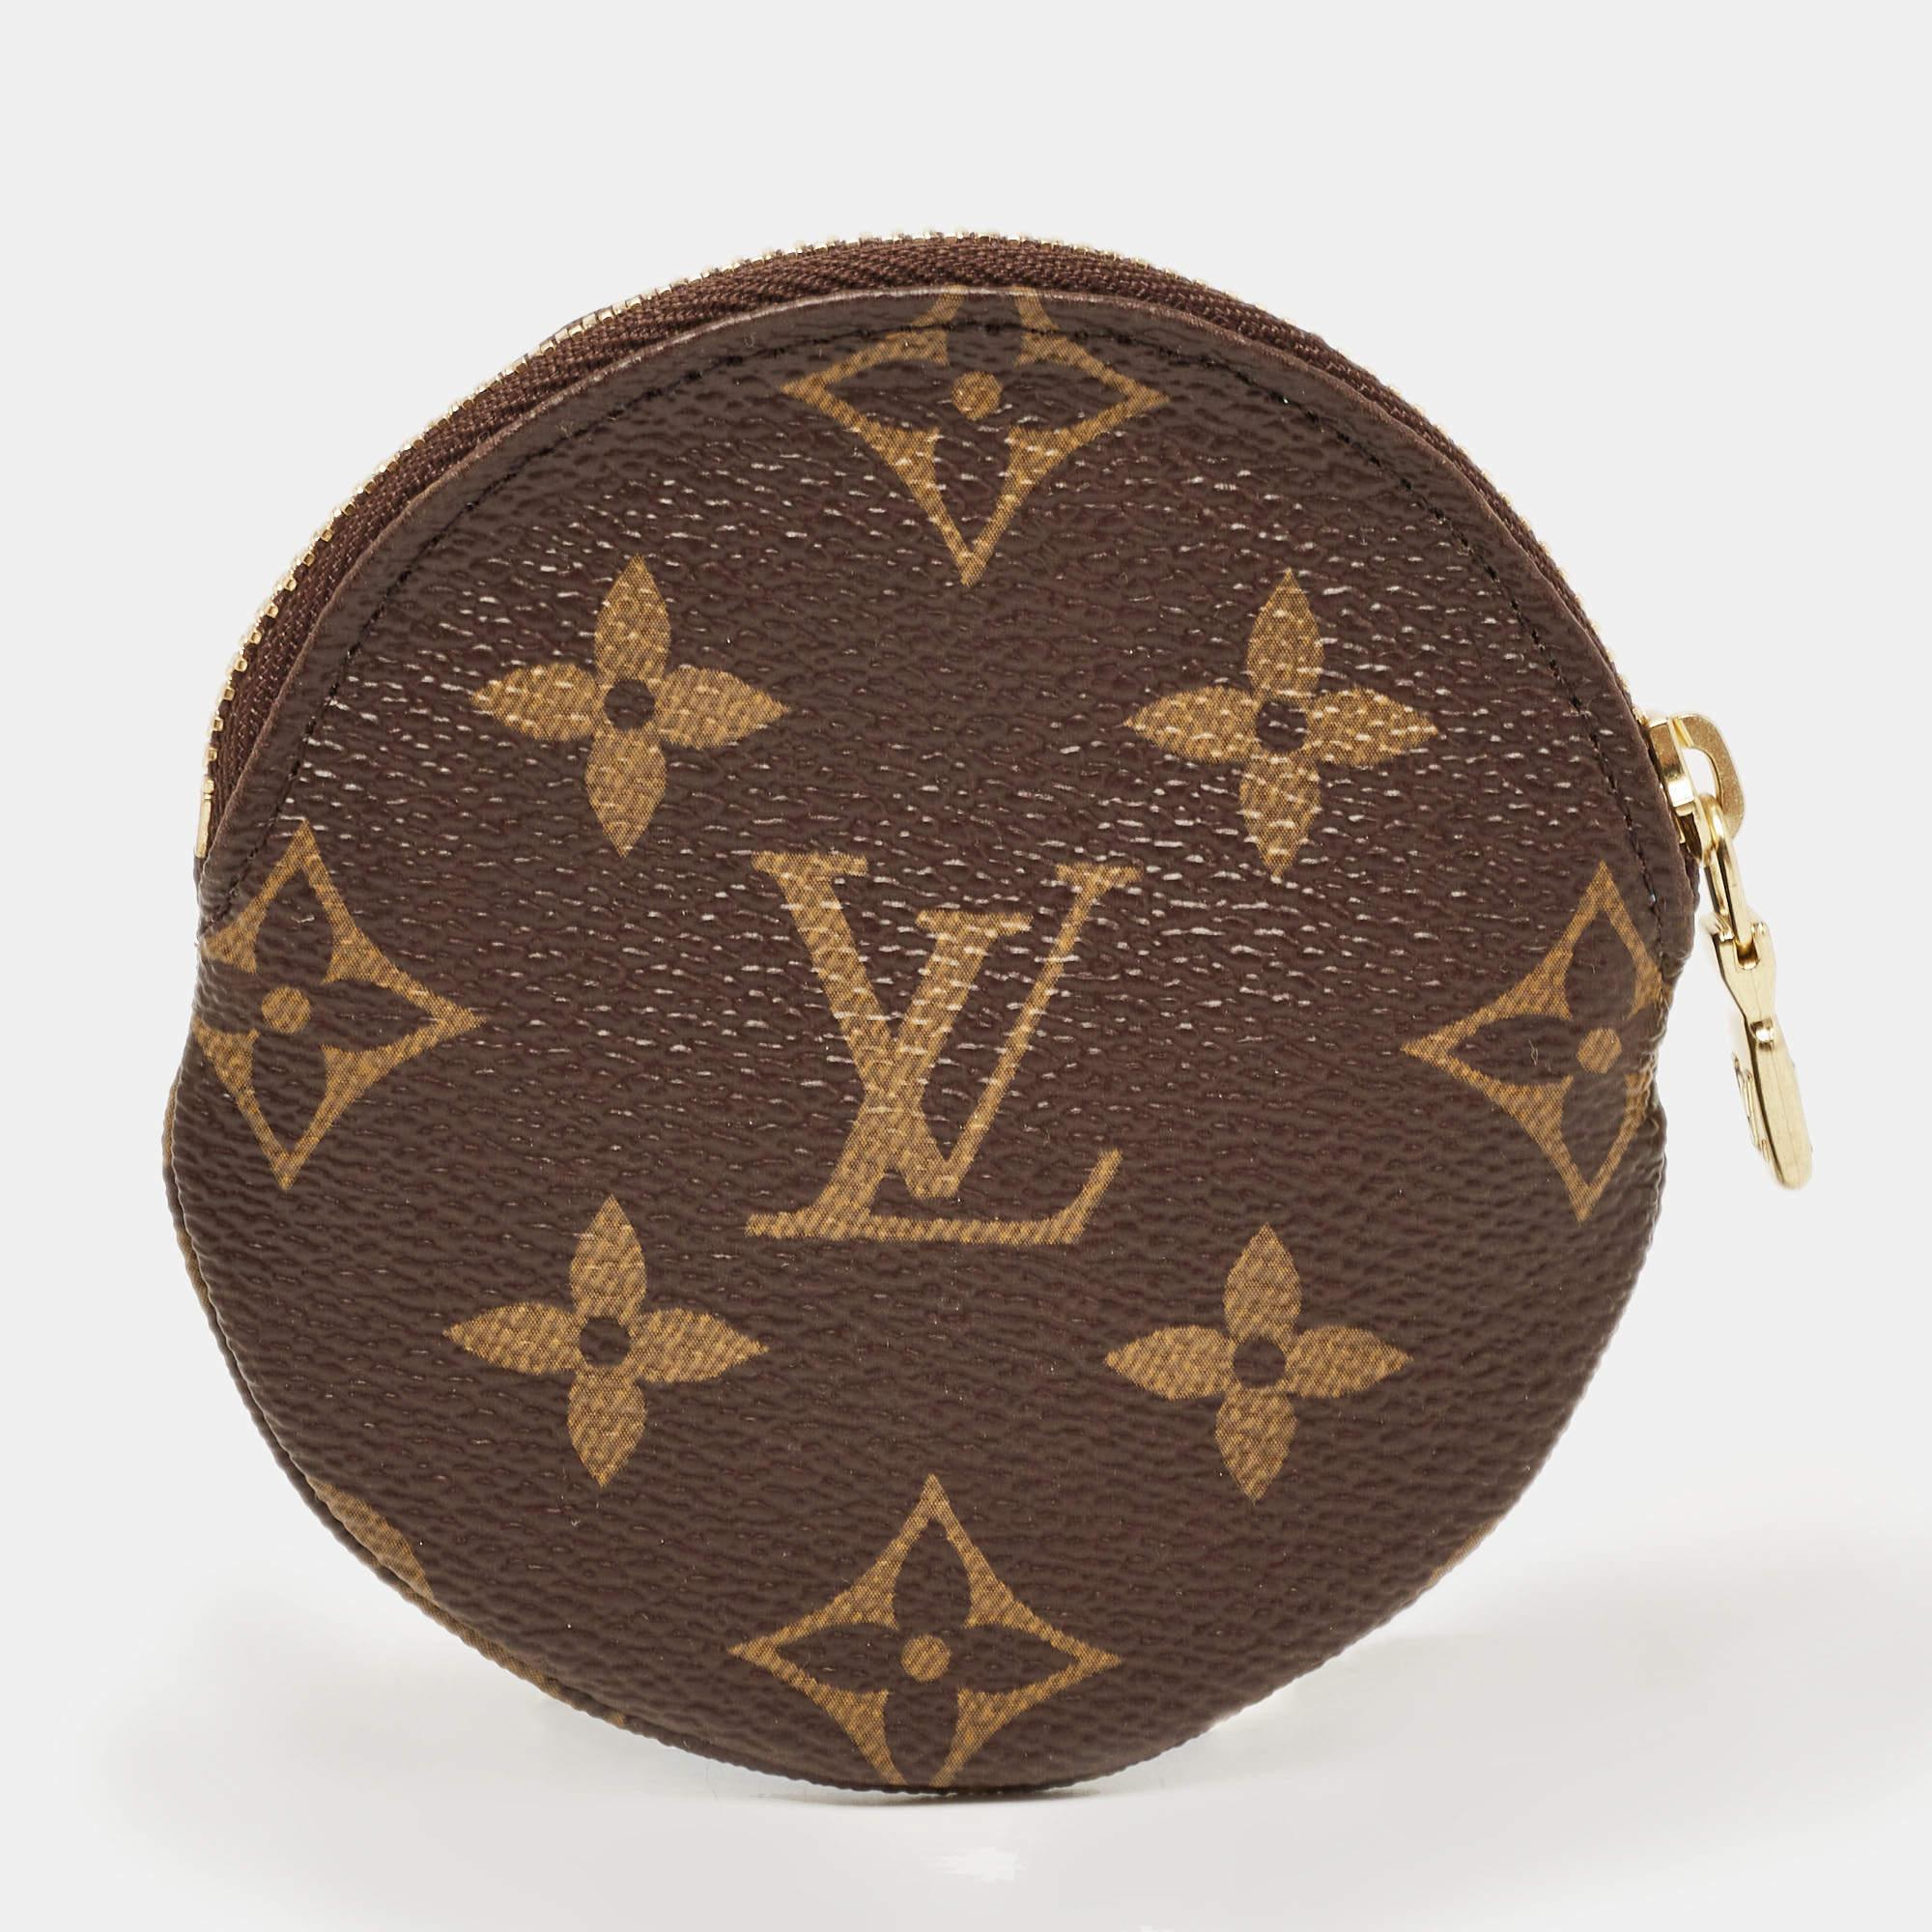 The Louis Vuitton coin purse is a petite and festive accessory featuring the iconic monogram pattern. Adorned with a charming Christmas-themed Vivienne illustration, it is a stylish and compact essential for storing coins and small